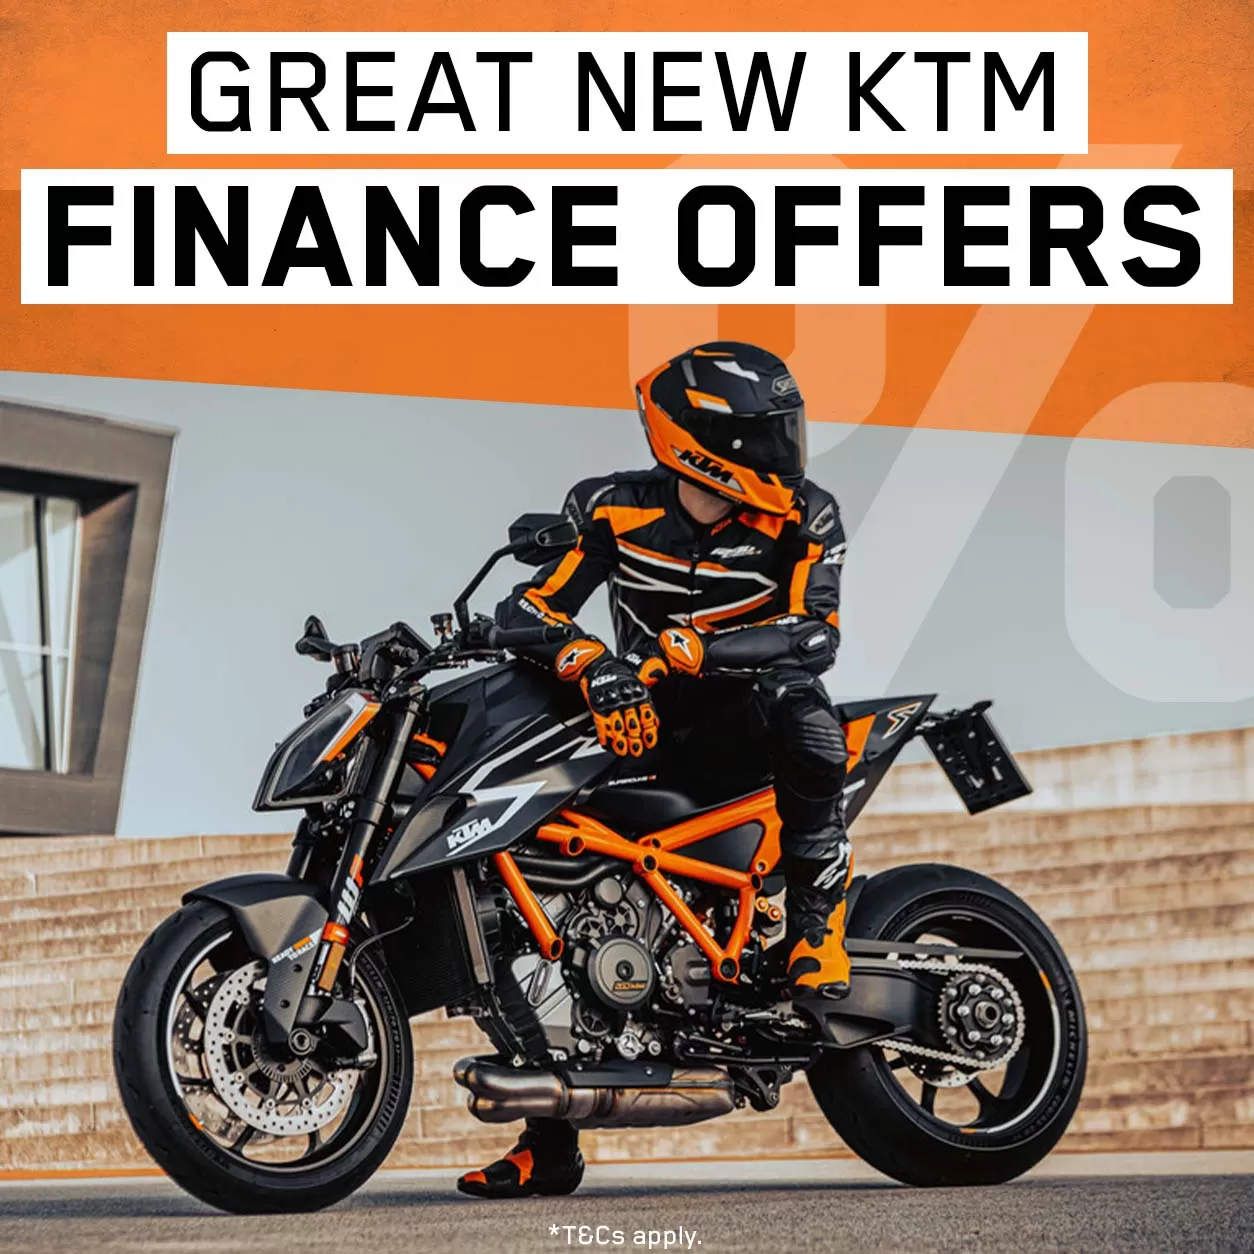 KTM Finance Offers Available